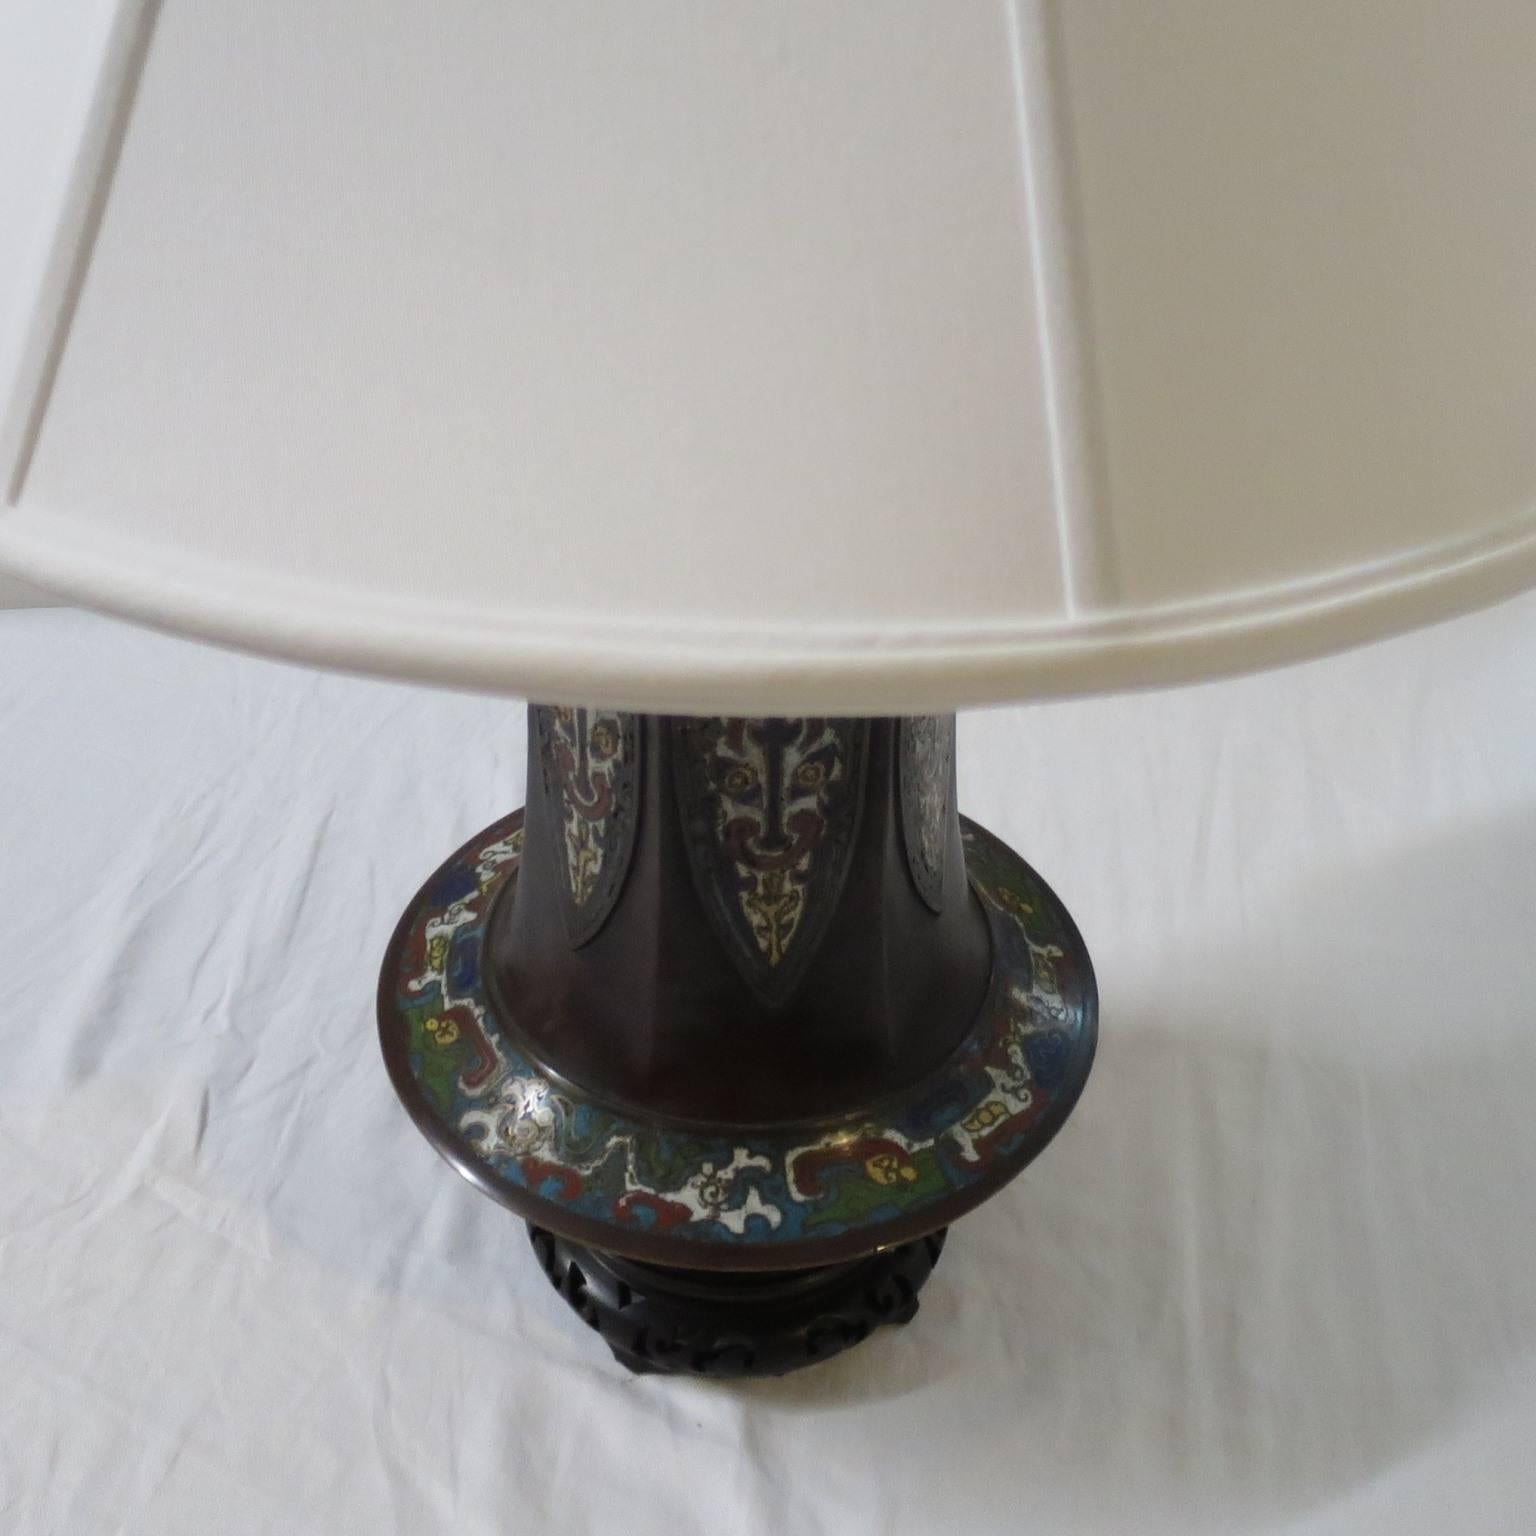 Chinese Cloisonné Enamel Bronze Vase 19th Century Mounted as a Table Lamp In Good Condition For Sale In Miami, FL